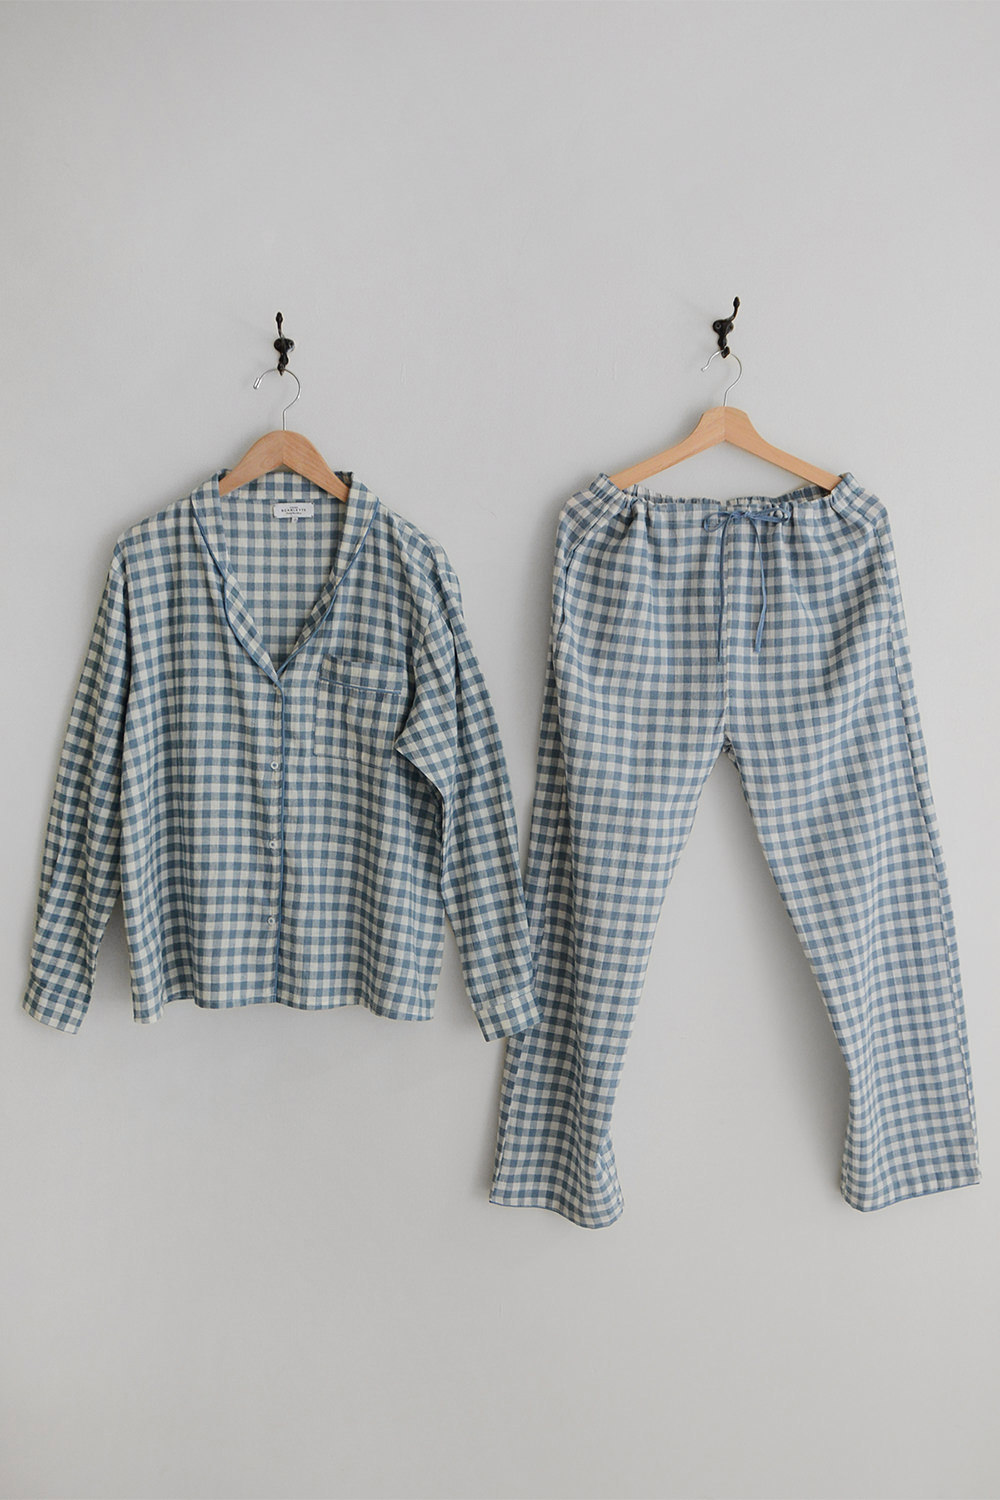 scarletter atelier pajama check a top picture